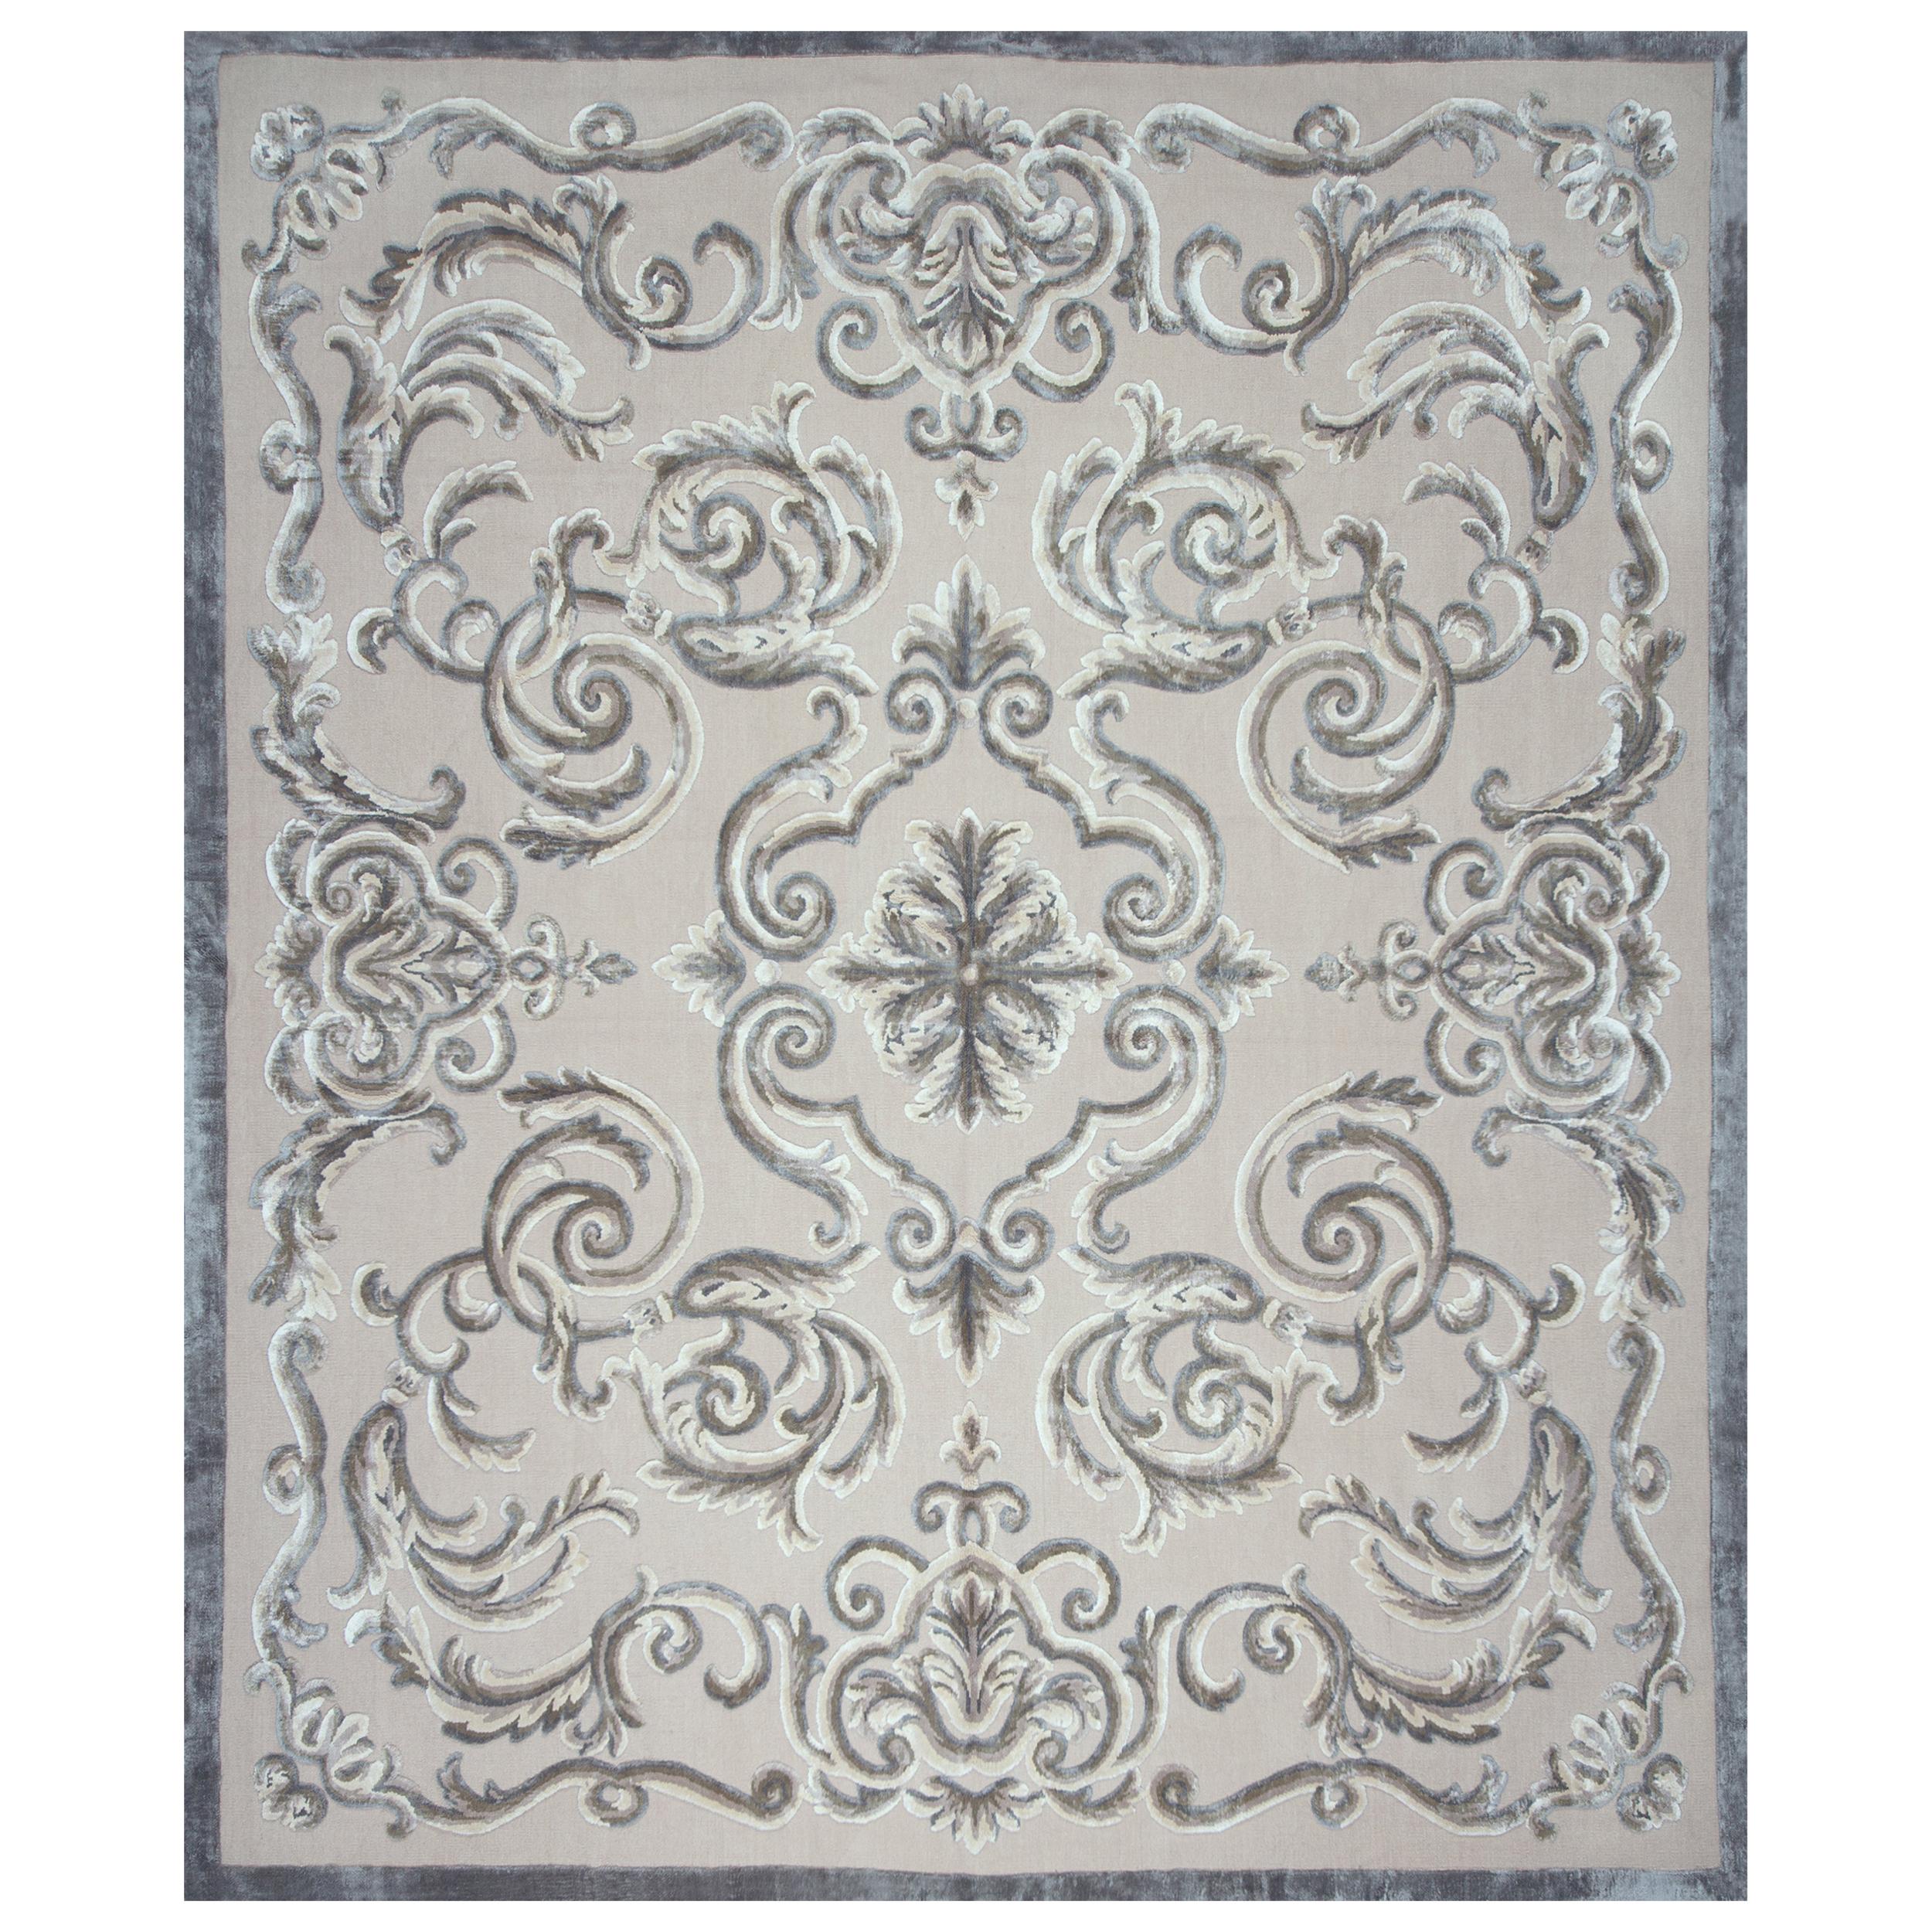 Aubusson inspired silk rug - Cardinal Naturel Ficelle, Edition Bougainville For Sale